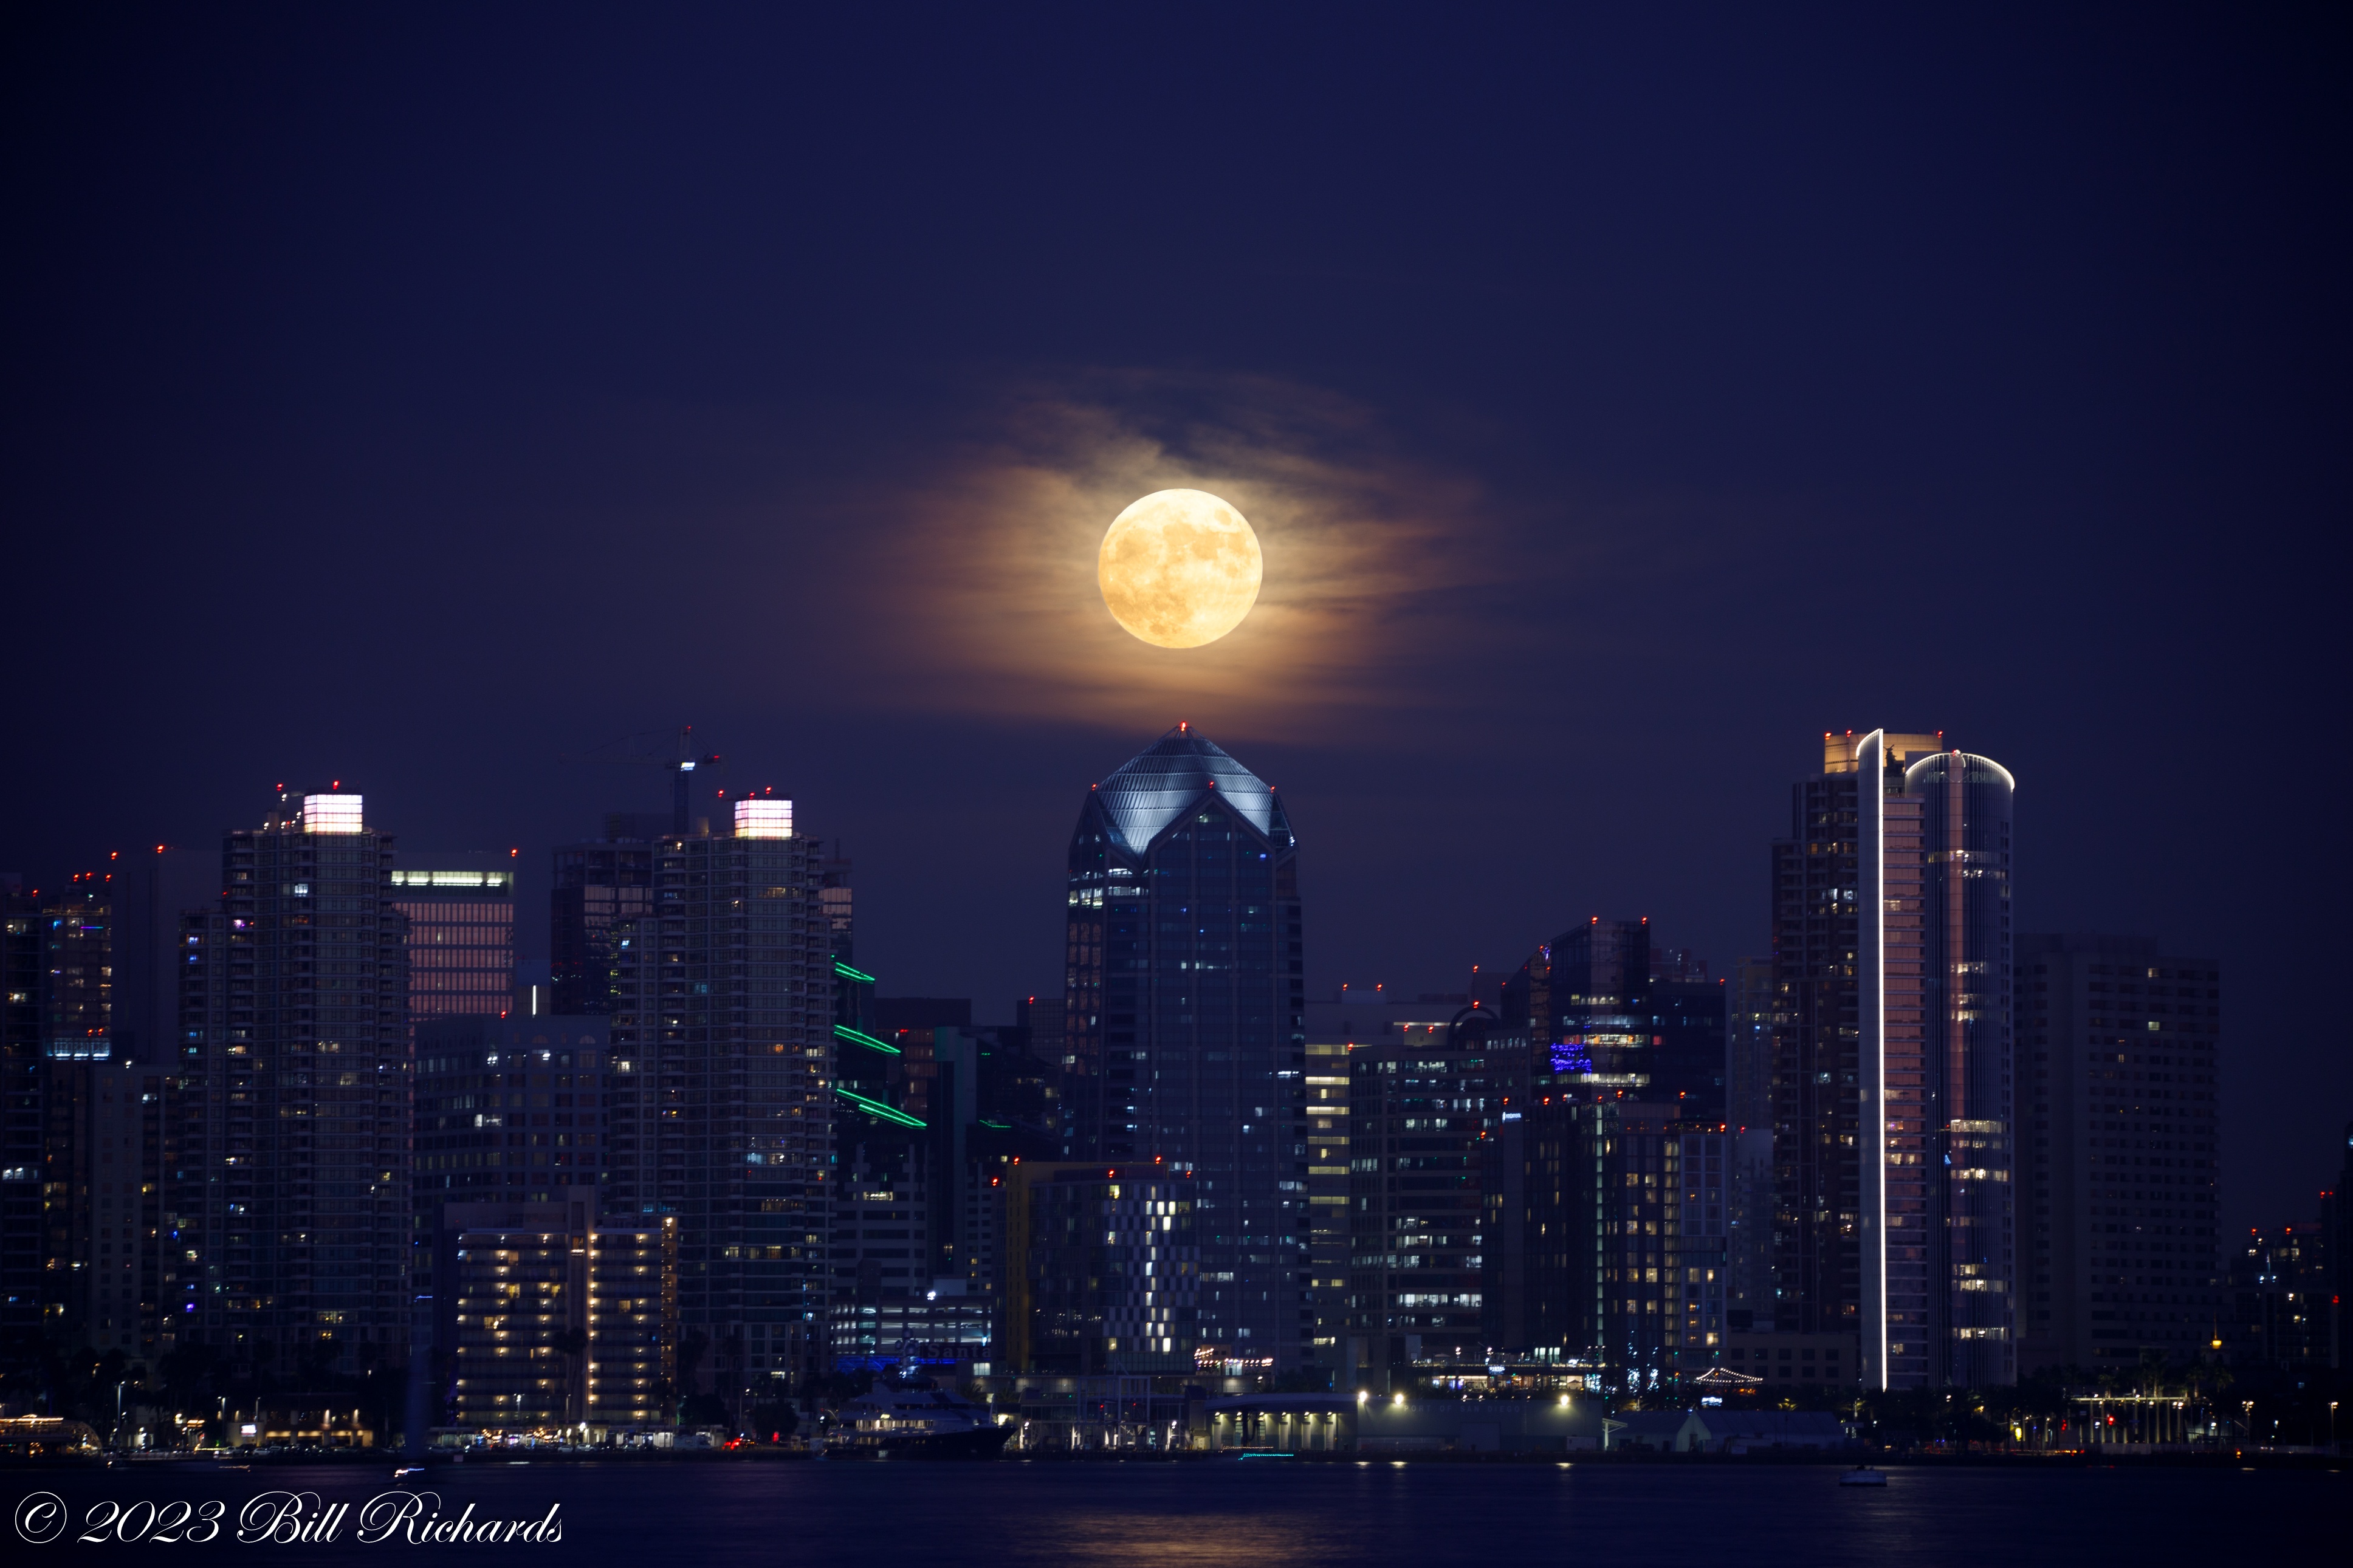 The San Diego Skyline shines under a bright supermoon in this photo by Bill Richards.